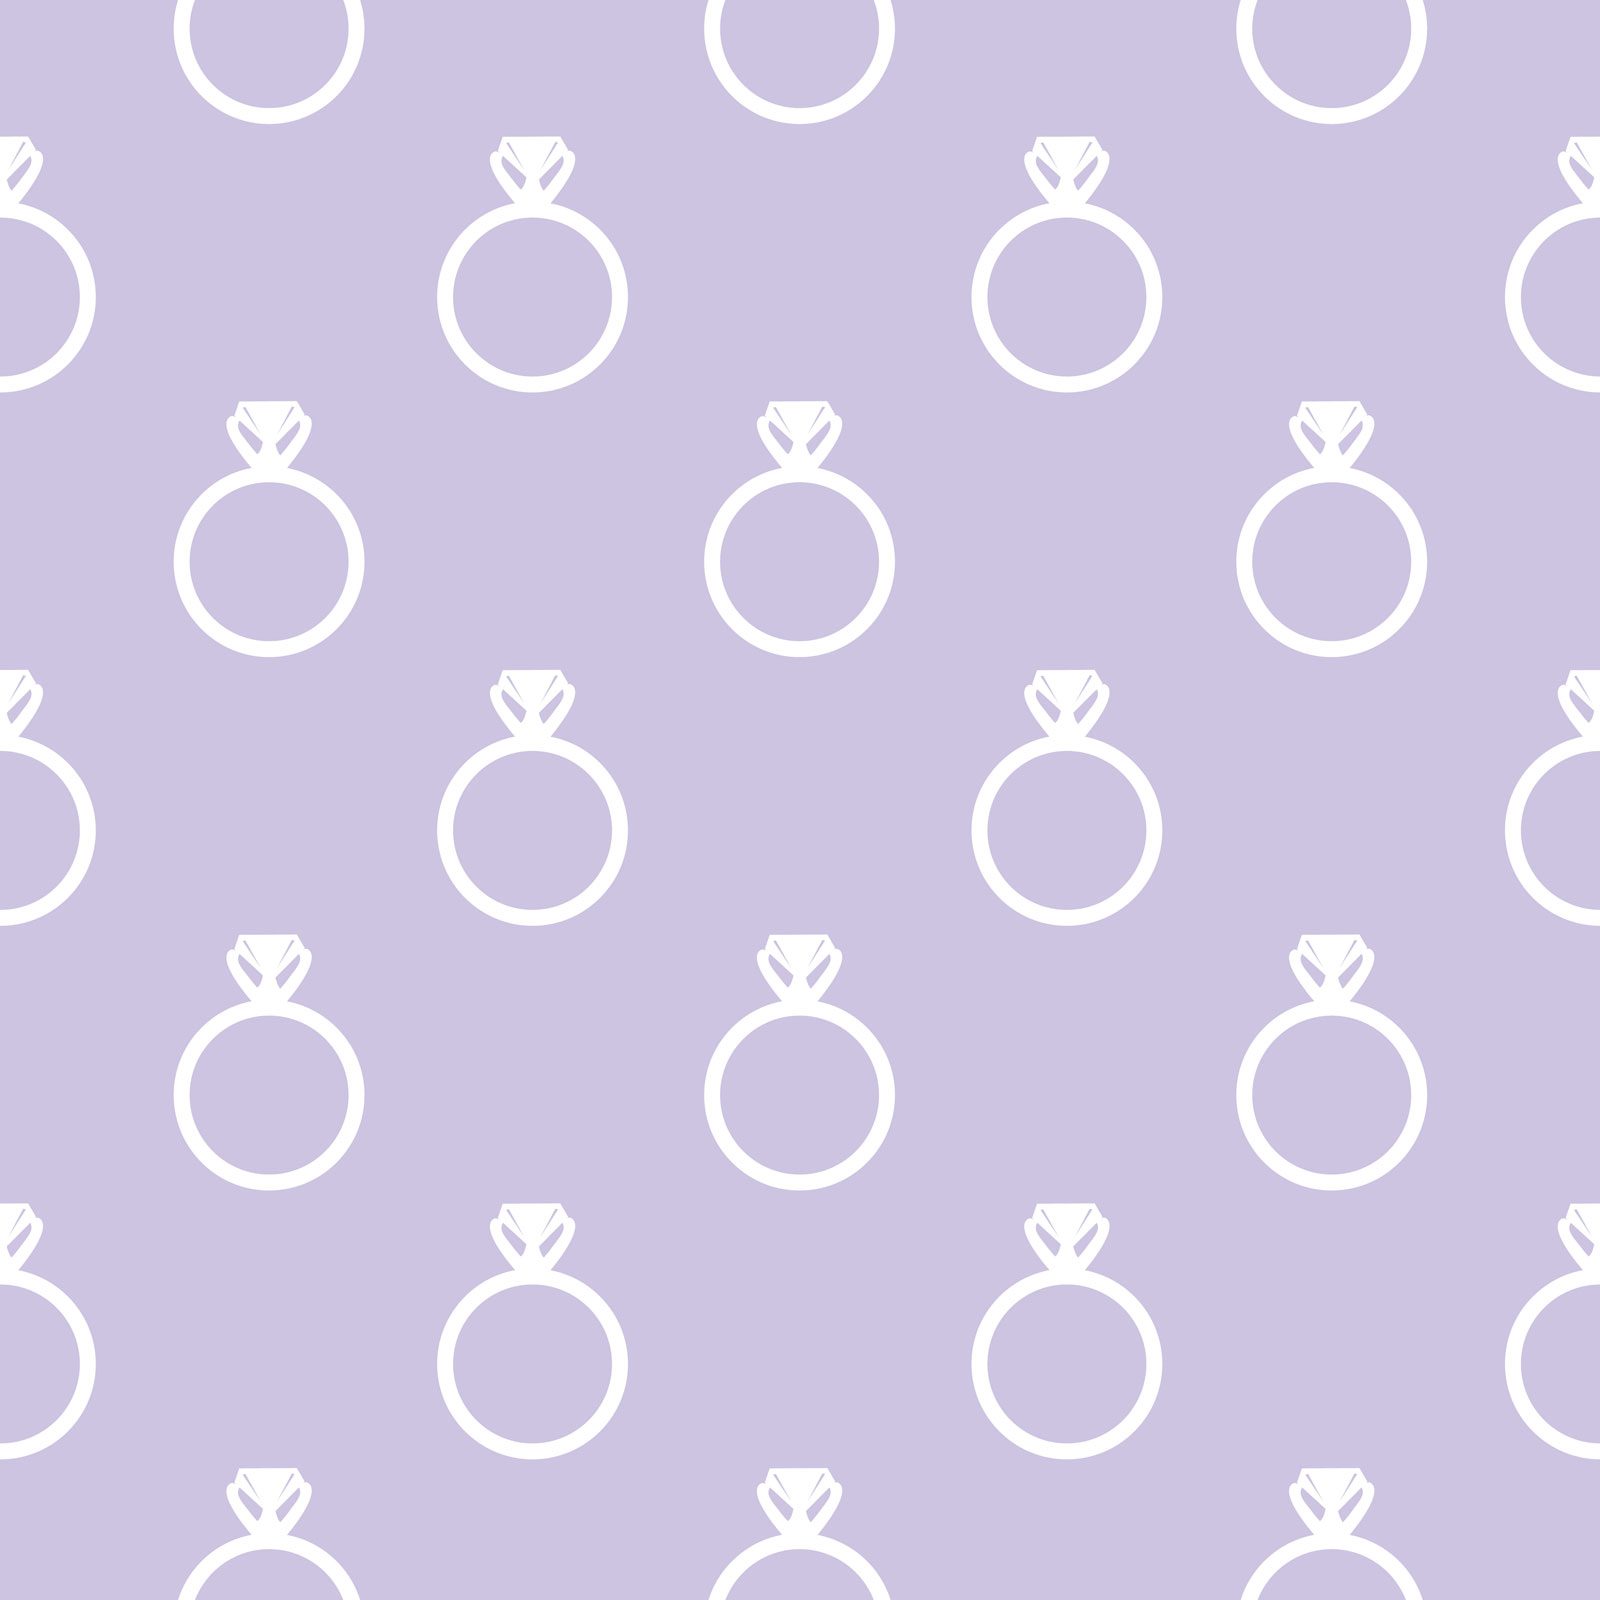 Background with ring symbols